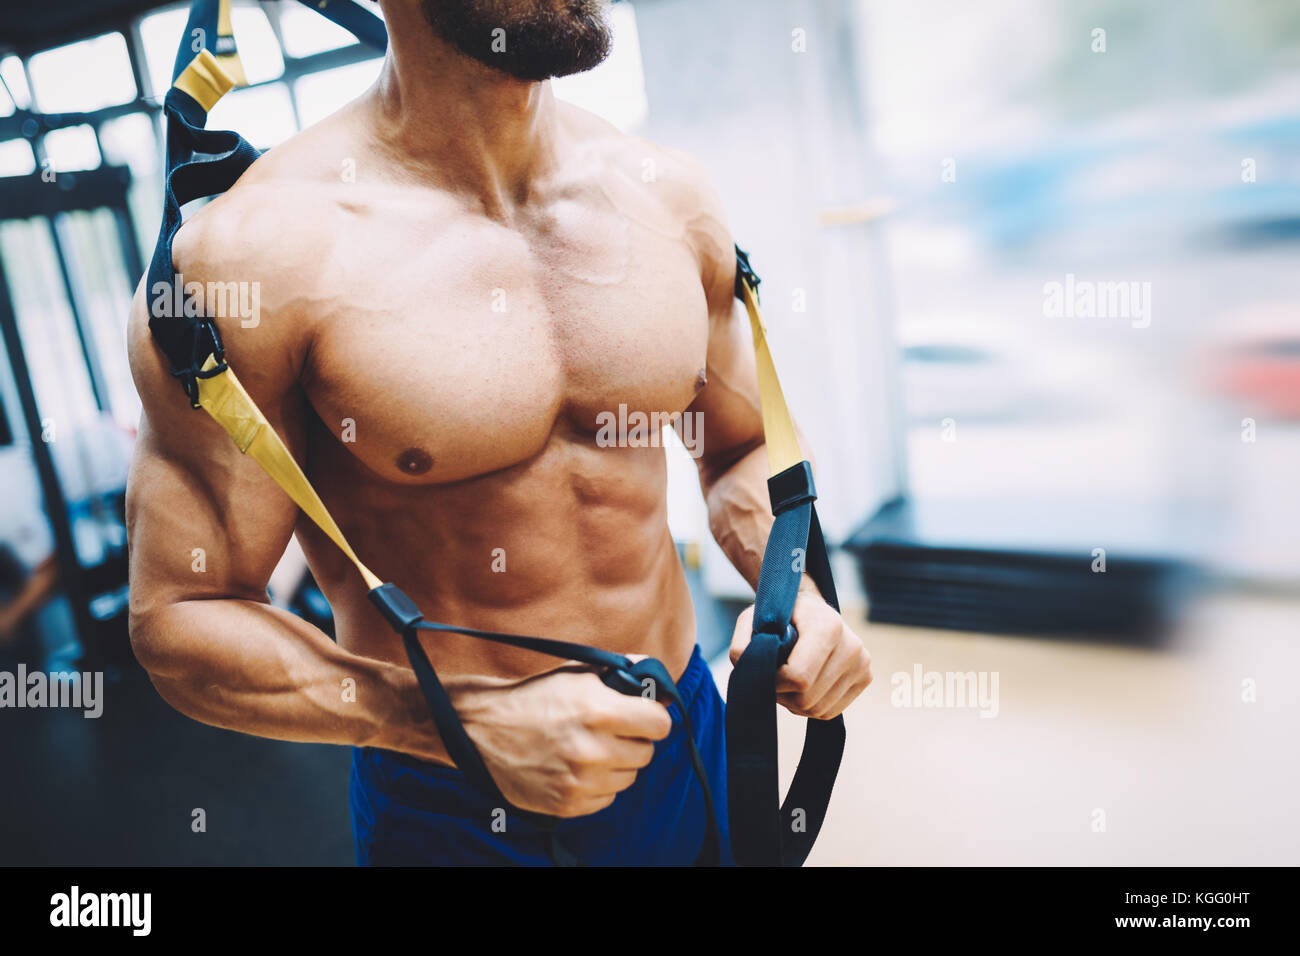 Young handsome man doing exercises in gym Banque D'Images